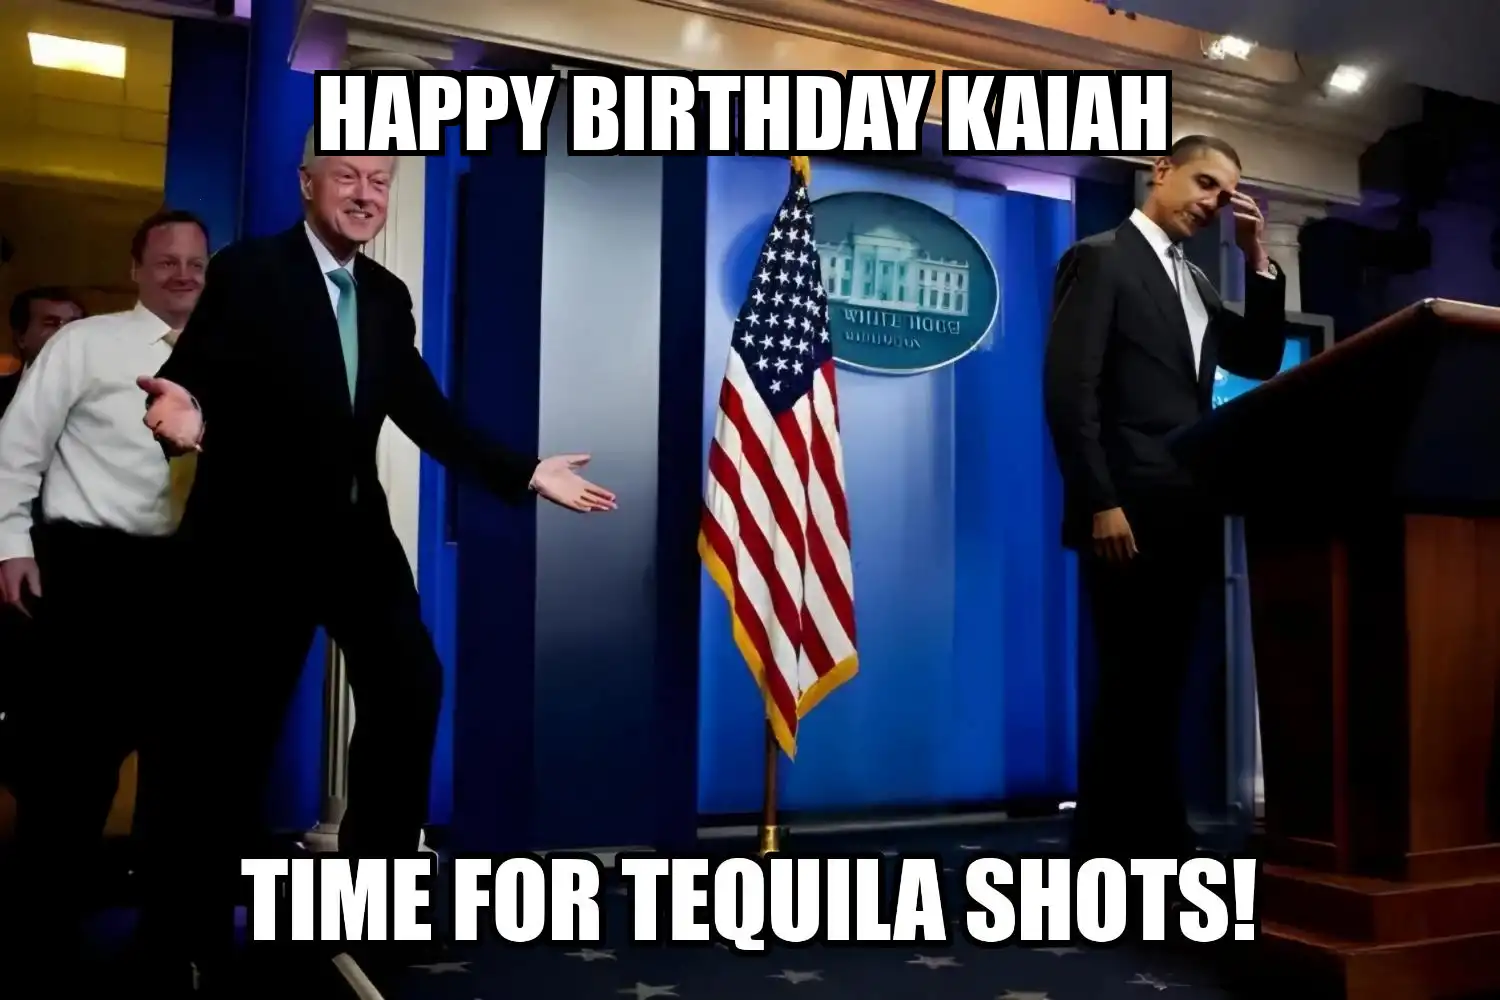 Happy Birthday Kaiah Time For Tequila Shots Memes